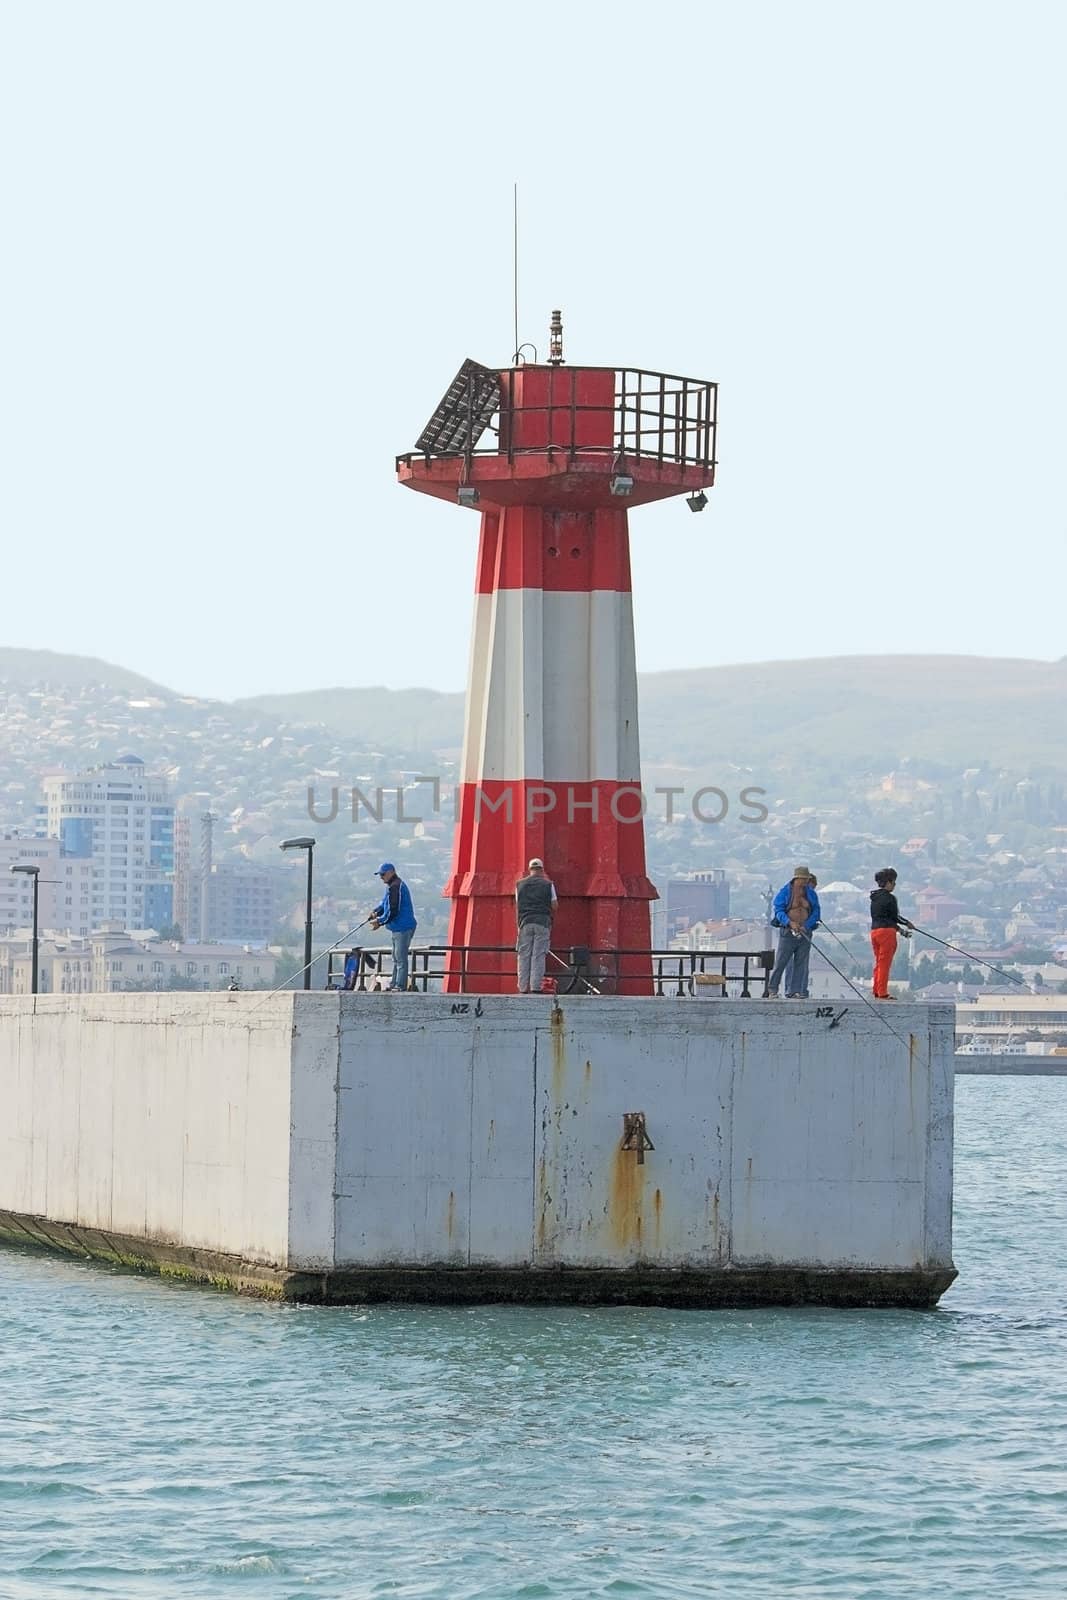 At entrance to port of Lighthouse on shores of Black Sea, Novorossiysk, Russia.